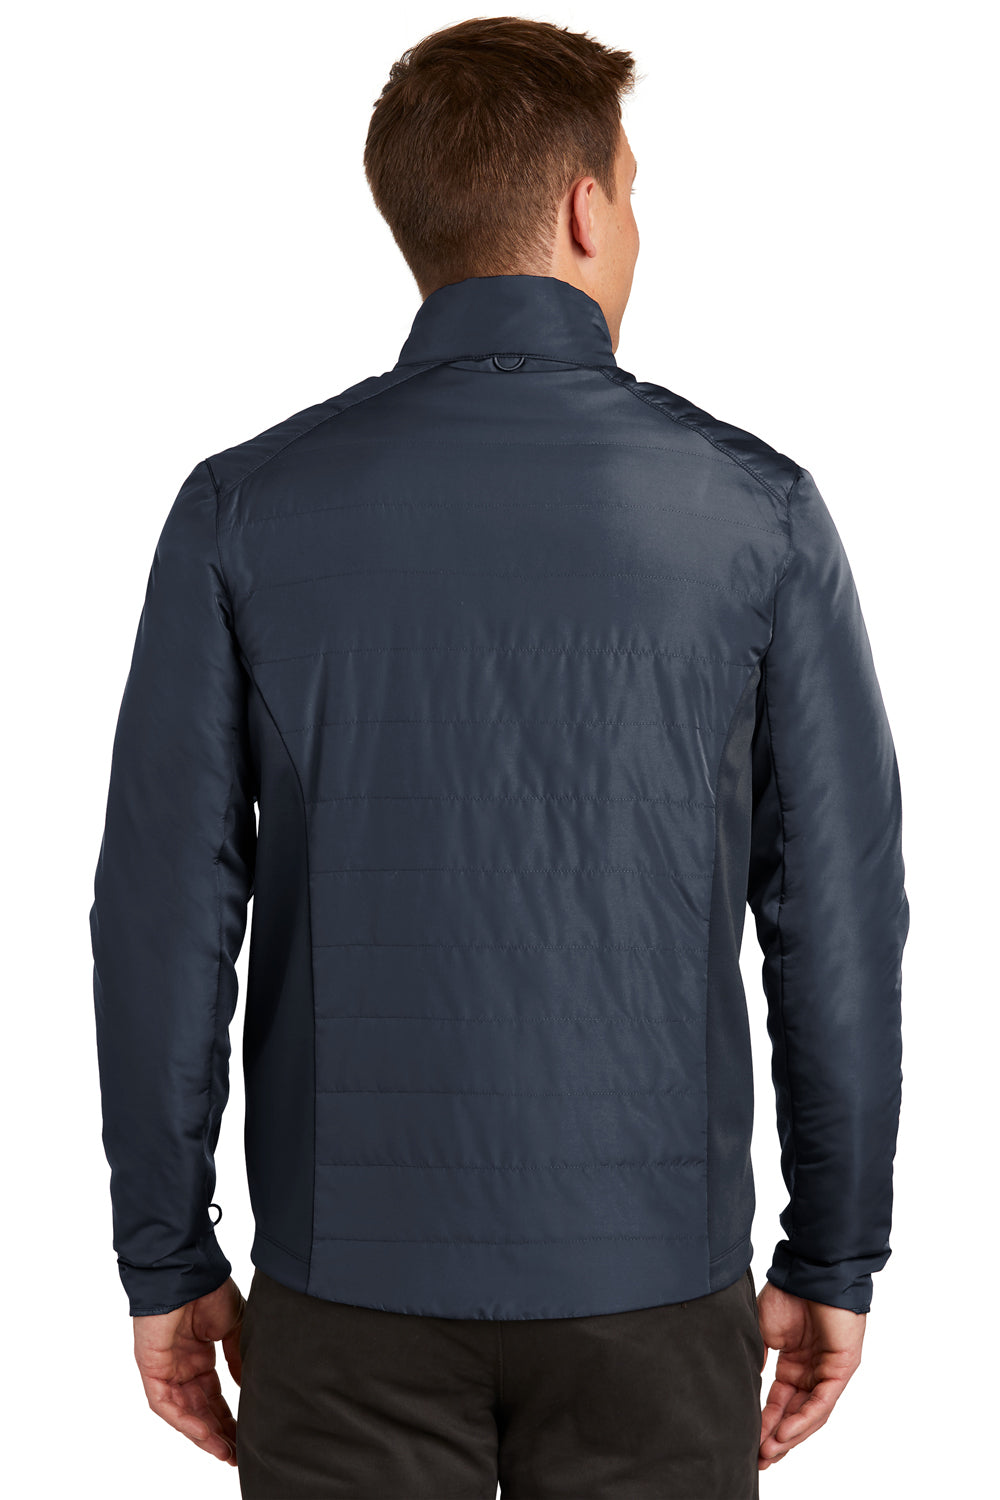 Port Authority J902 Mens Collective Wind & Water Resistant Full Zip Jacket River Blue Back